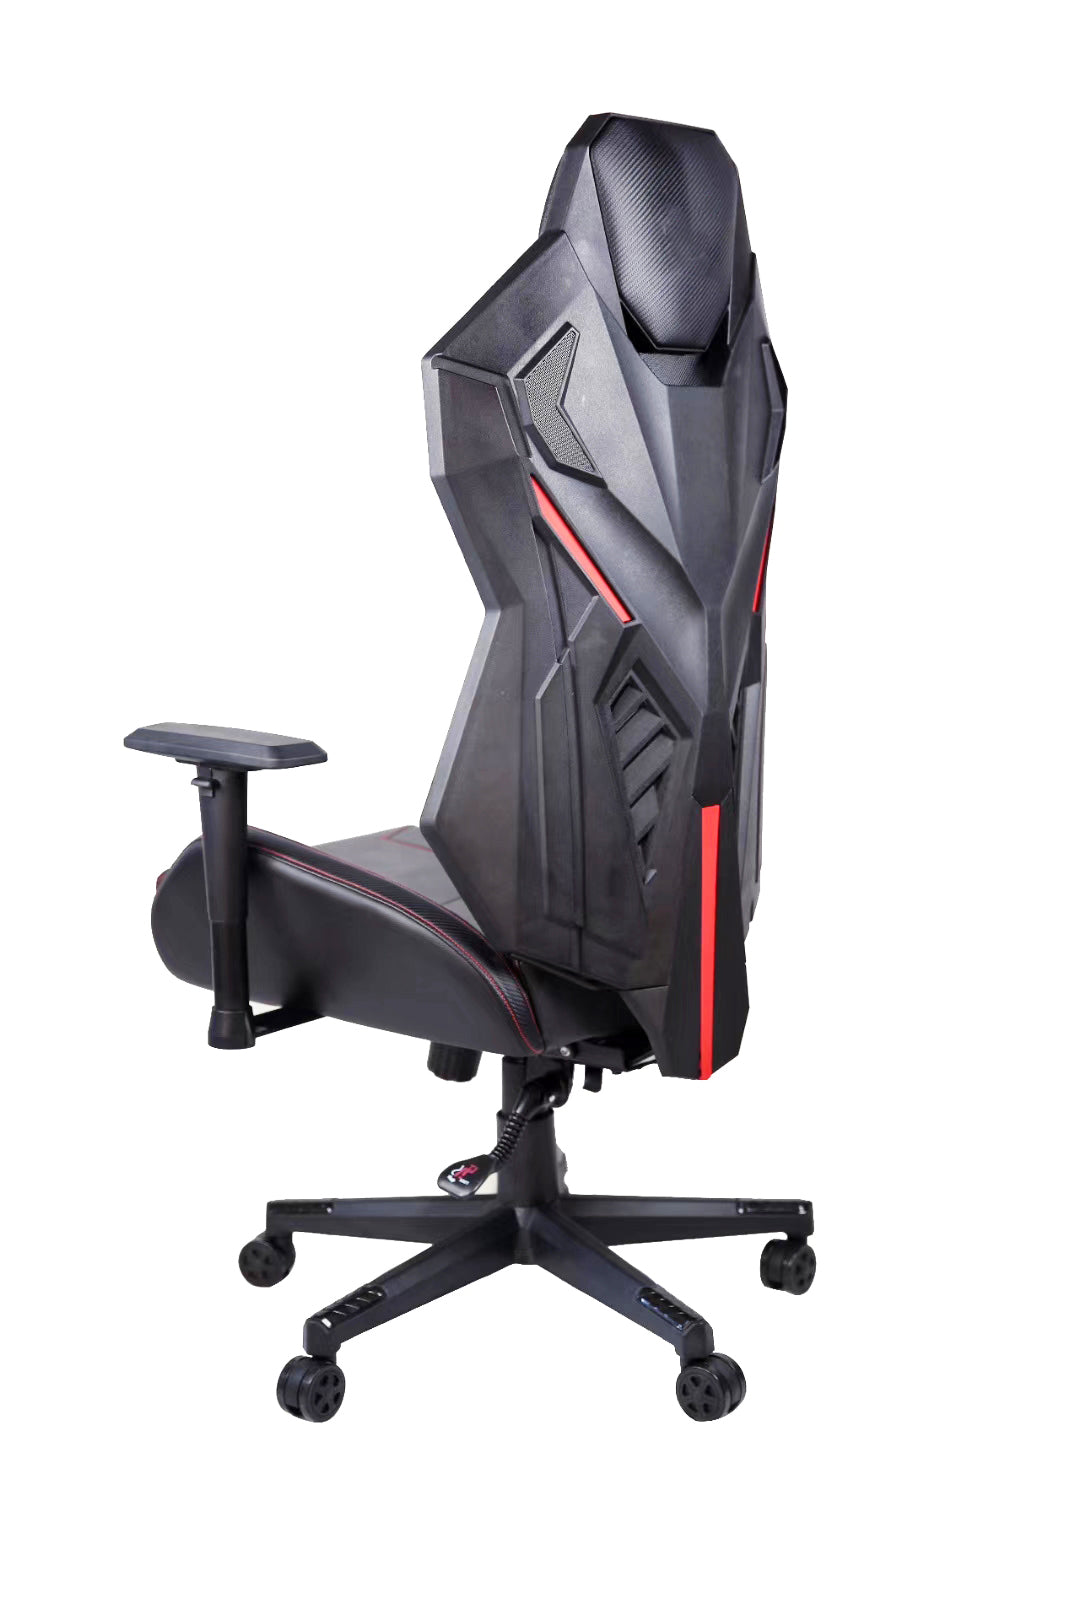 ViscoLogic PANTHER X Ergonomic E-Sports Video Gaming Chair Racing